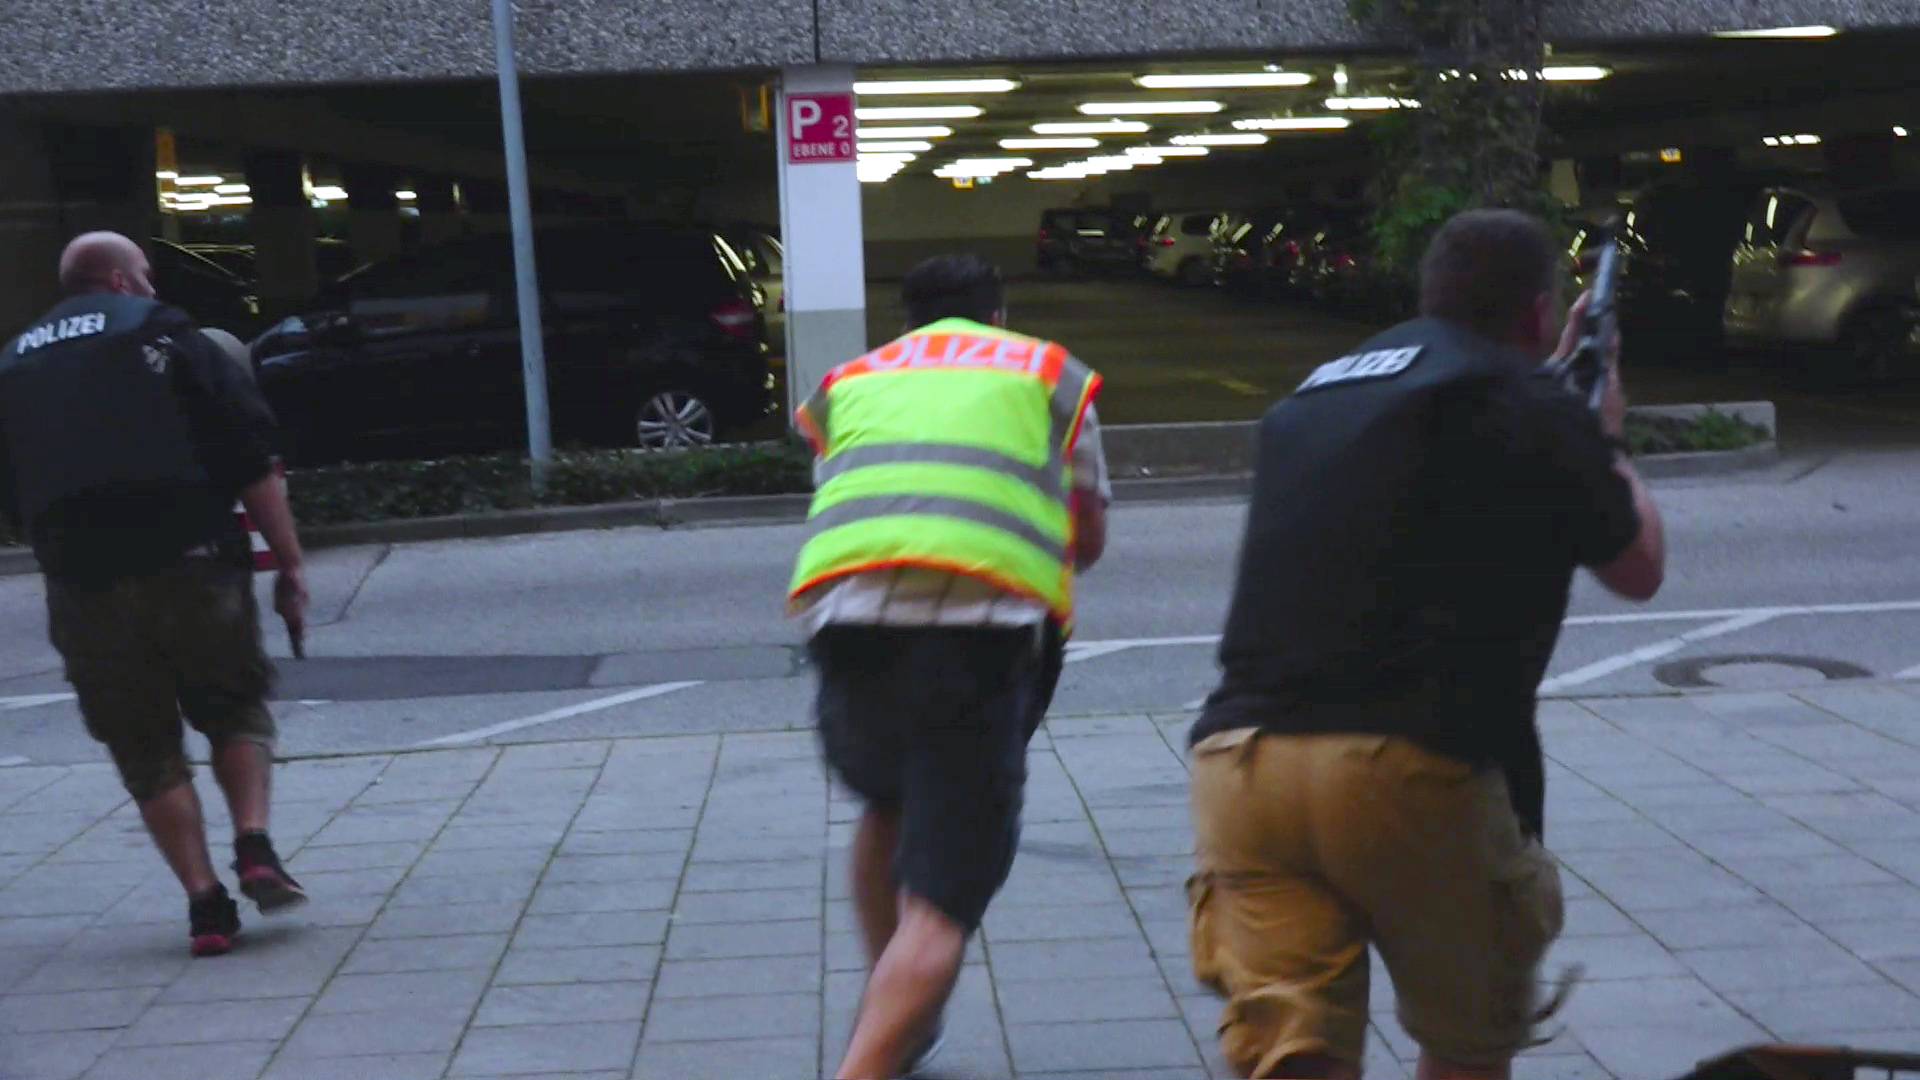 Screen grab shows plain clothes police officers running towards car park of shopping mall during shooting rampage in Munich